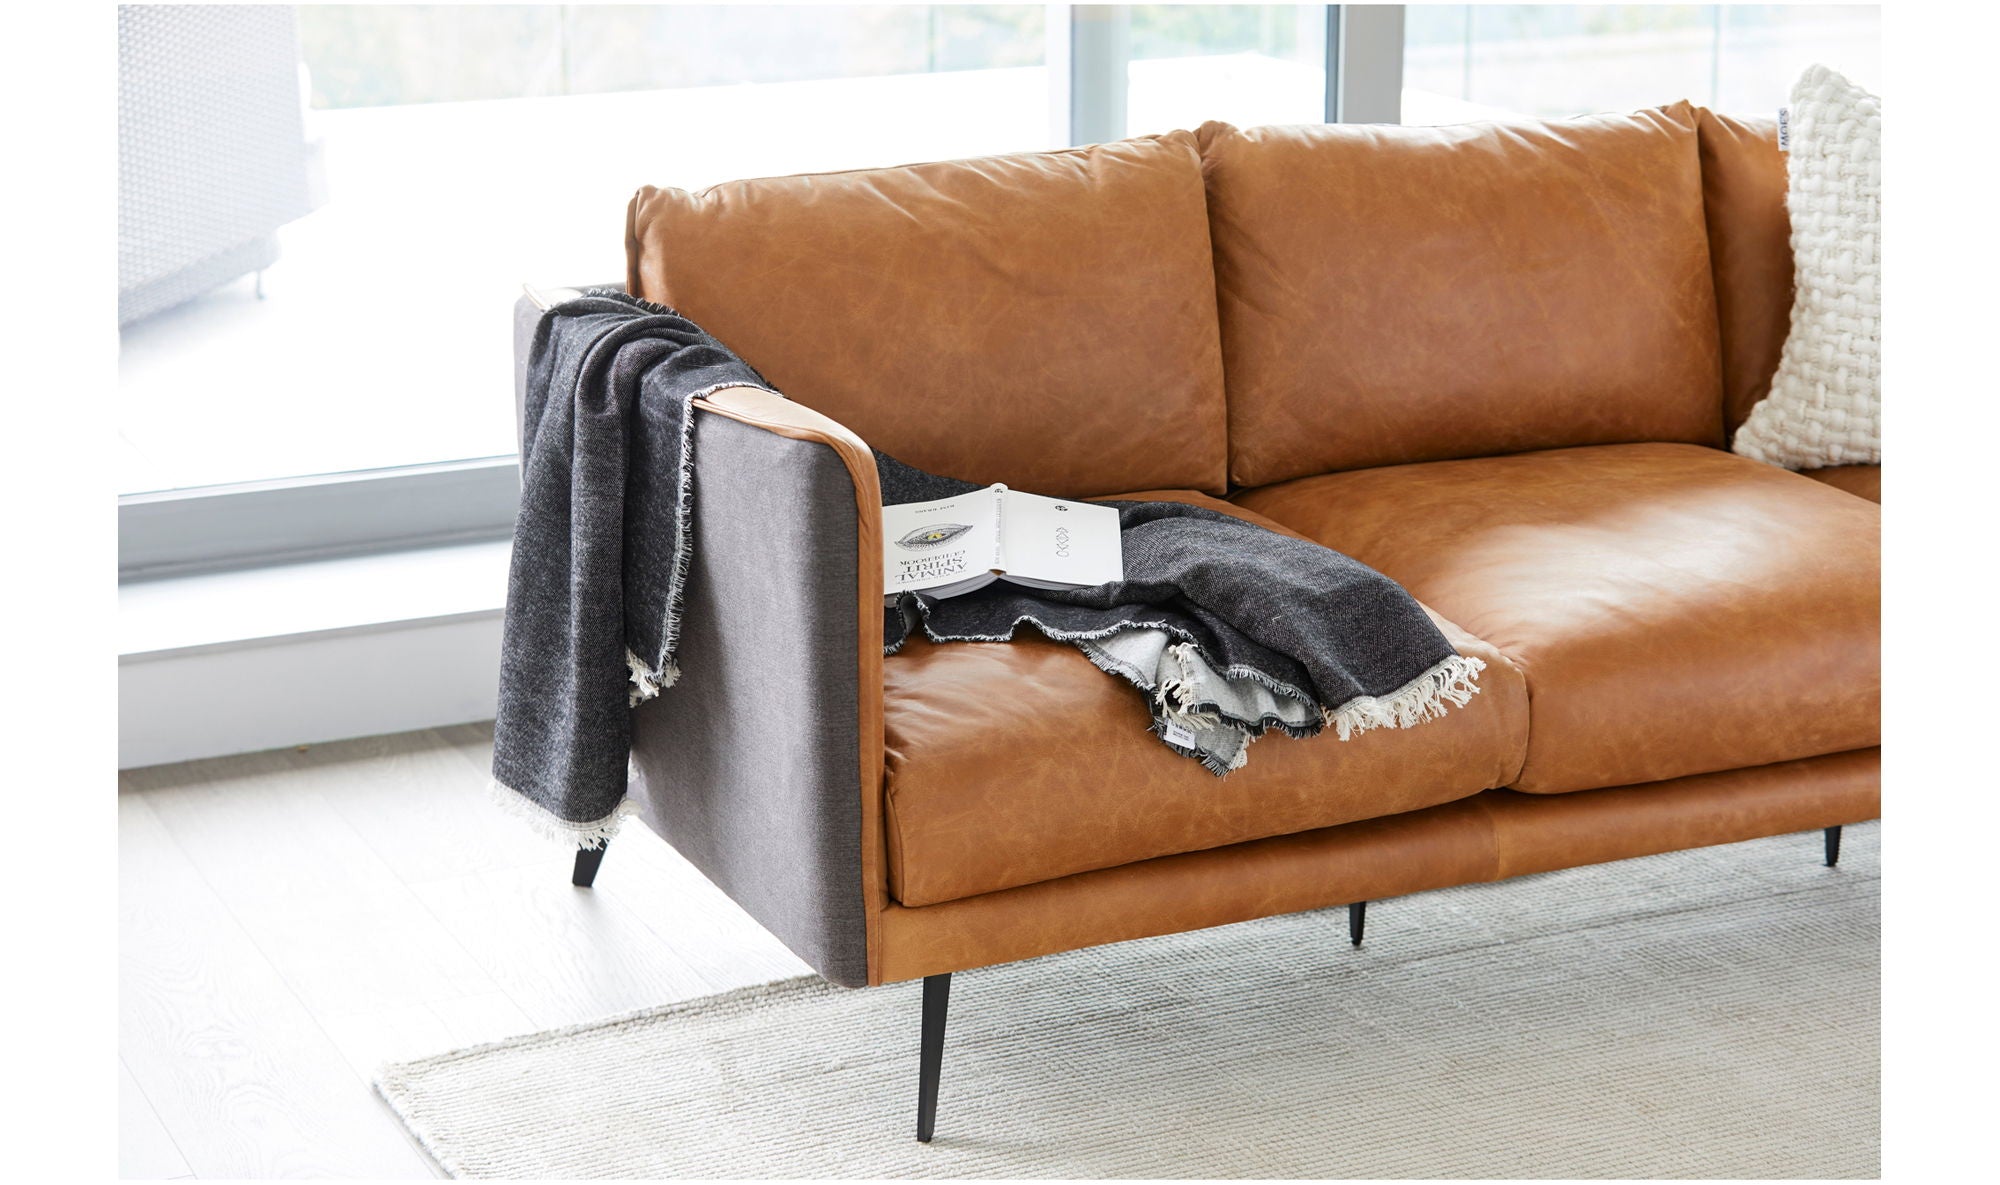 Messina Leather Sofa - Cognac Brown Top-Grain Leather - Stylish and Comfortable Living Room Furniture